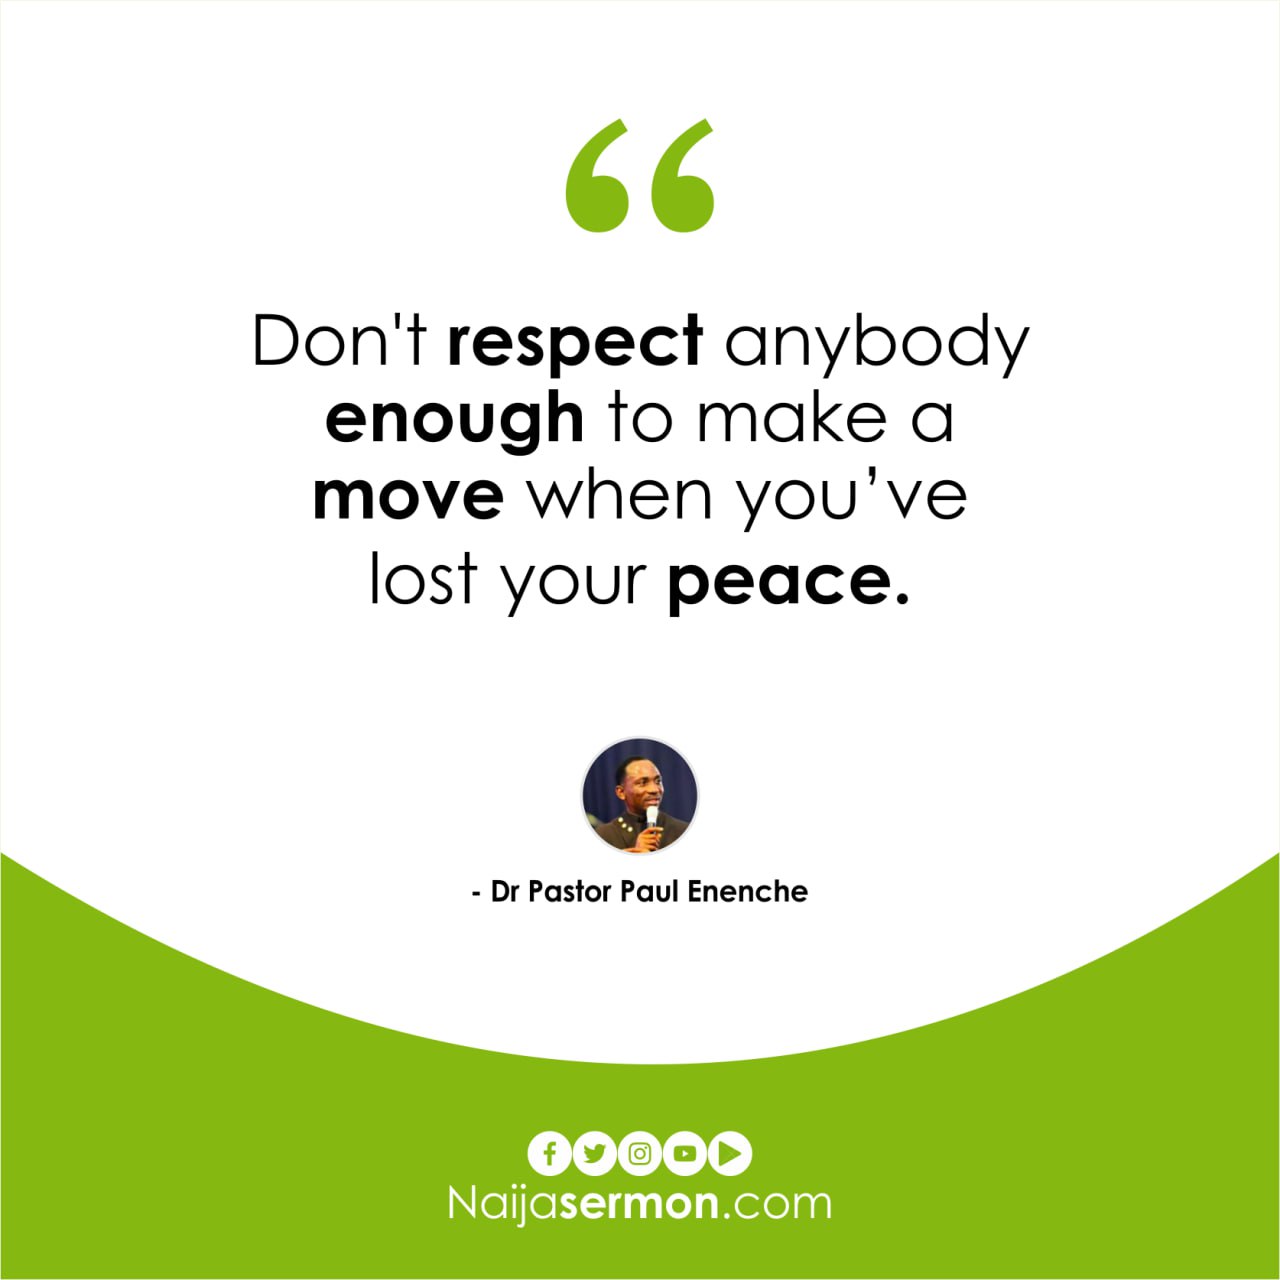 QUOTE OF THE DAY BY DR PASTOR PAUL ENENCHE 3